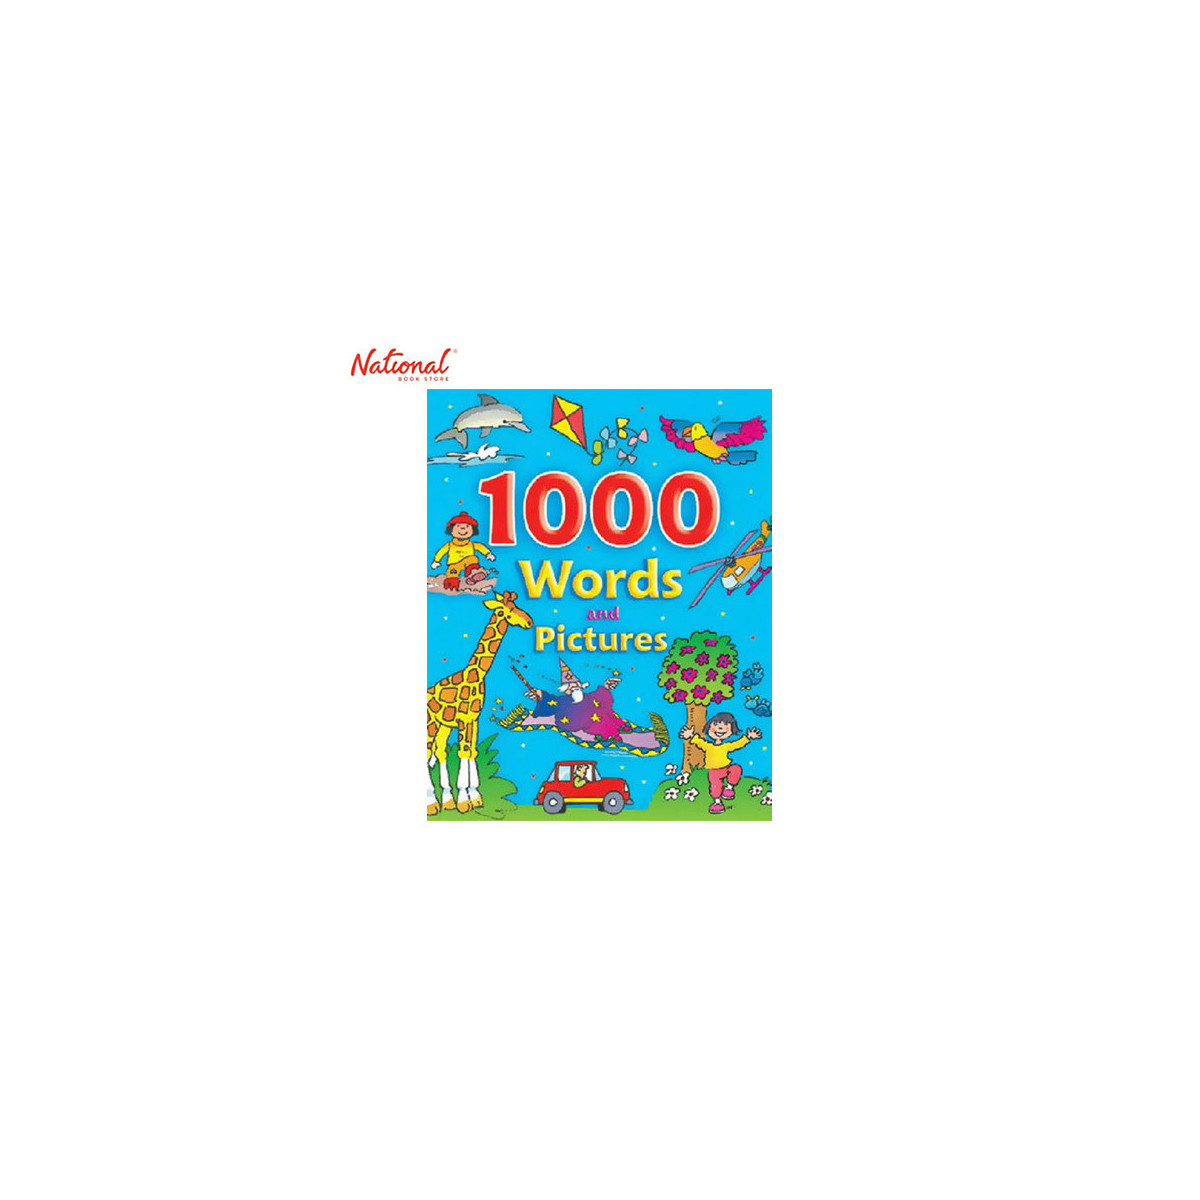 1000 Words And Pictures Book for Kids